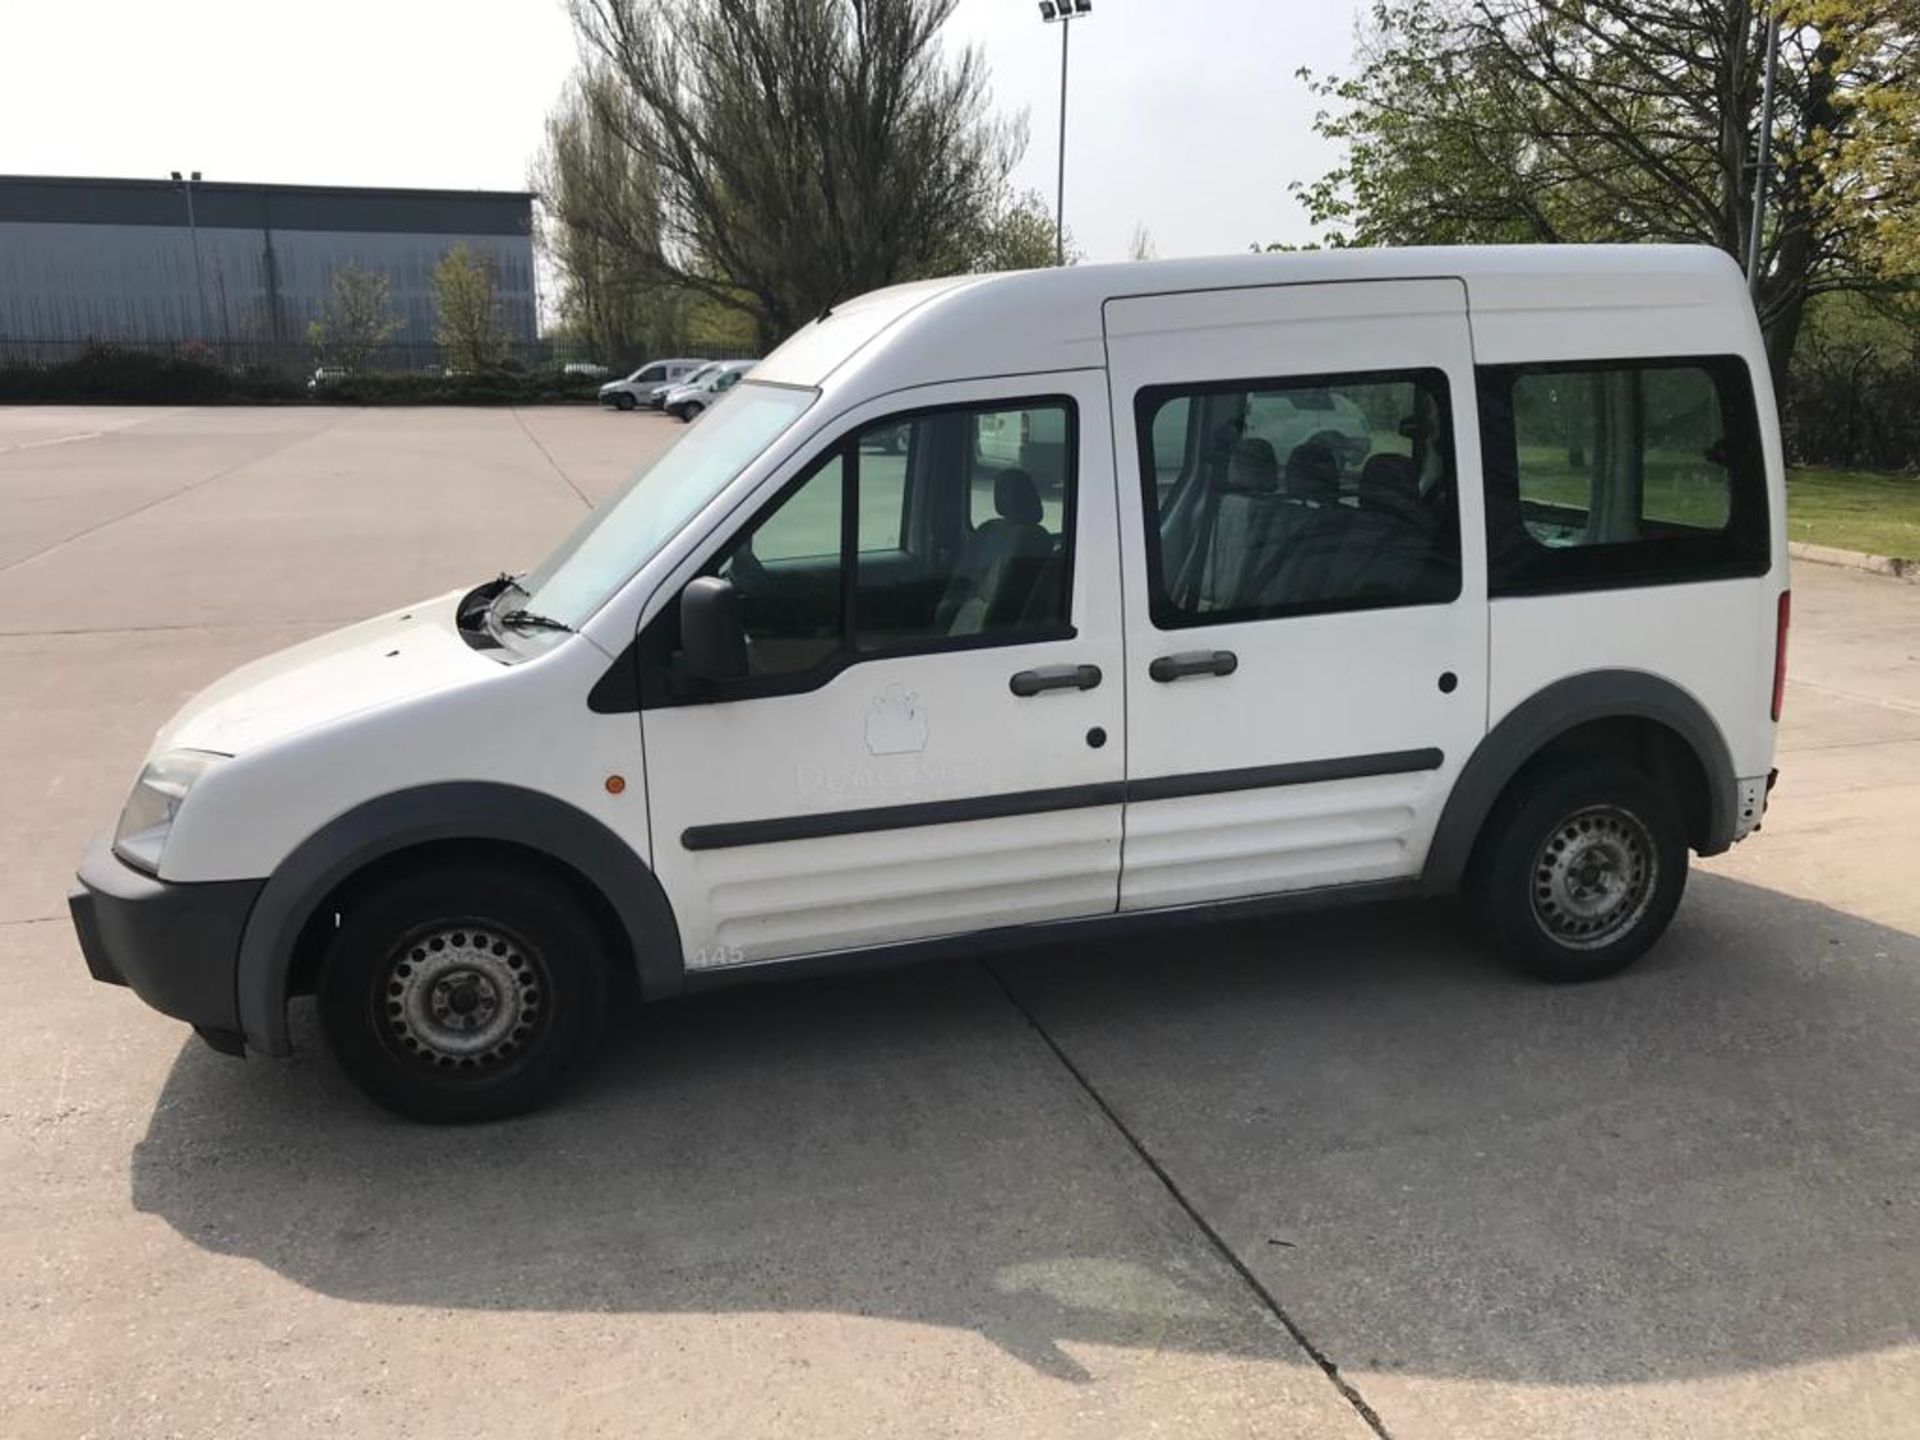 *NO RESERVE* Ford Torneo Connect Van 3TDCI LWB - Image 2 of 15